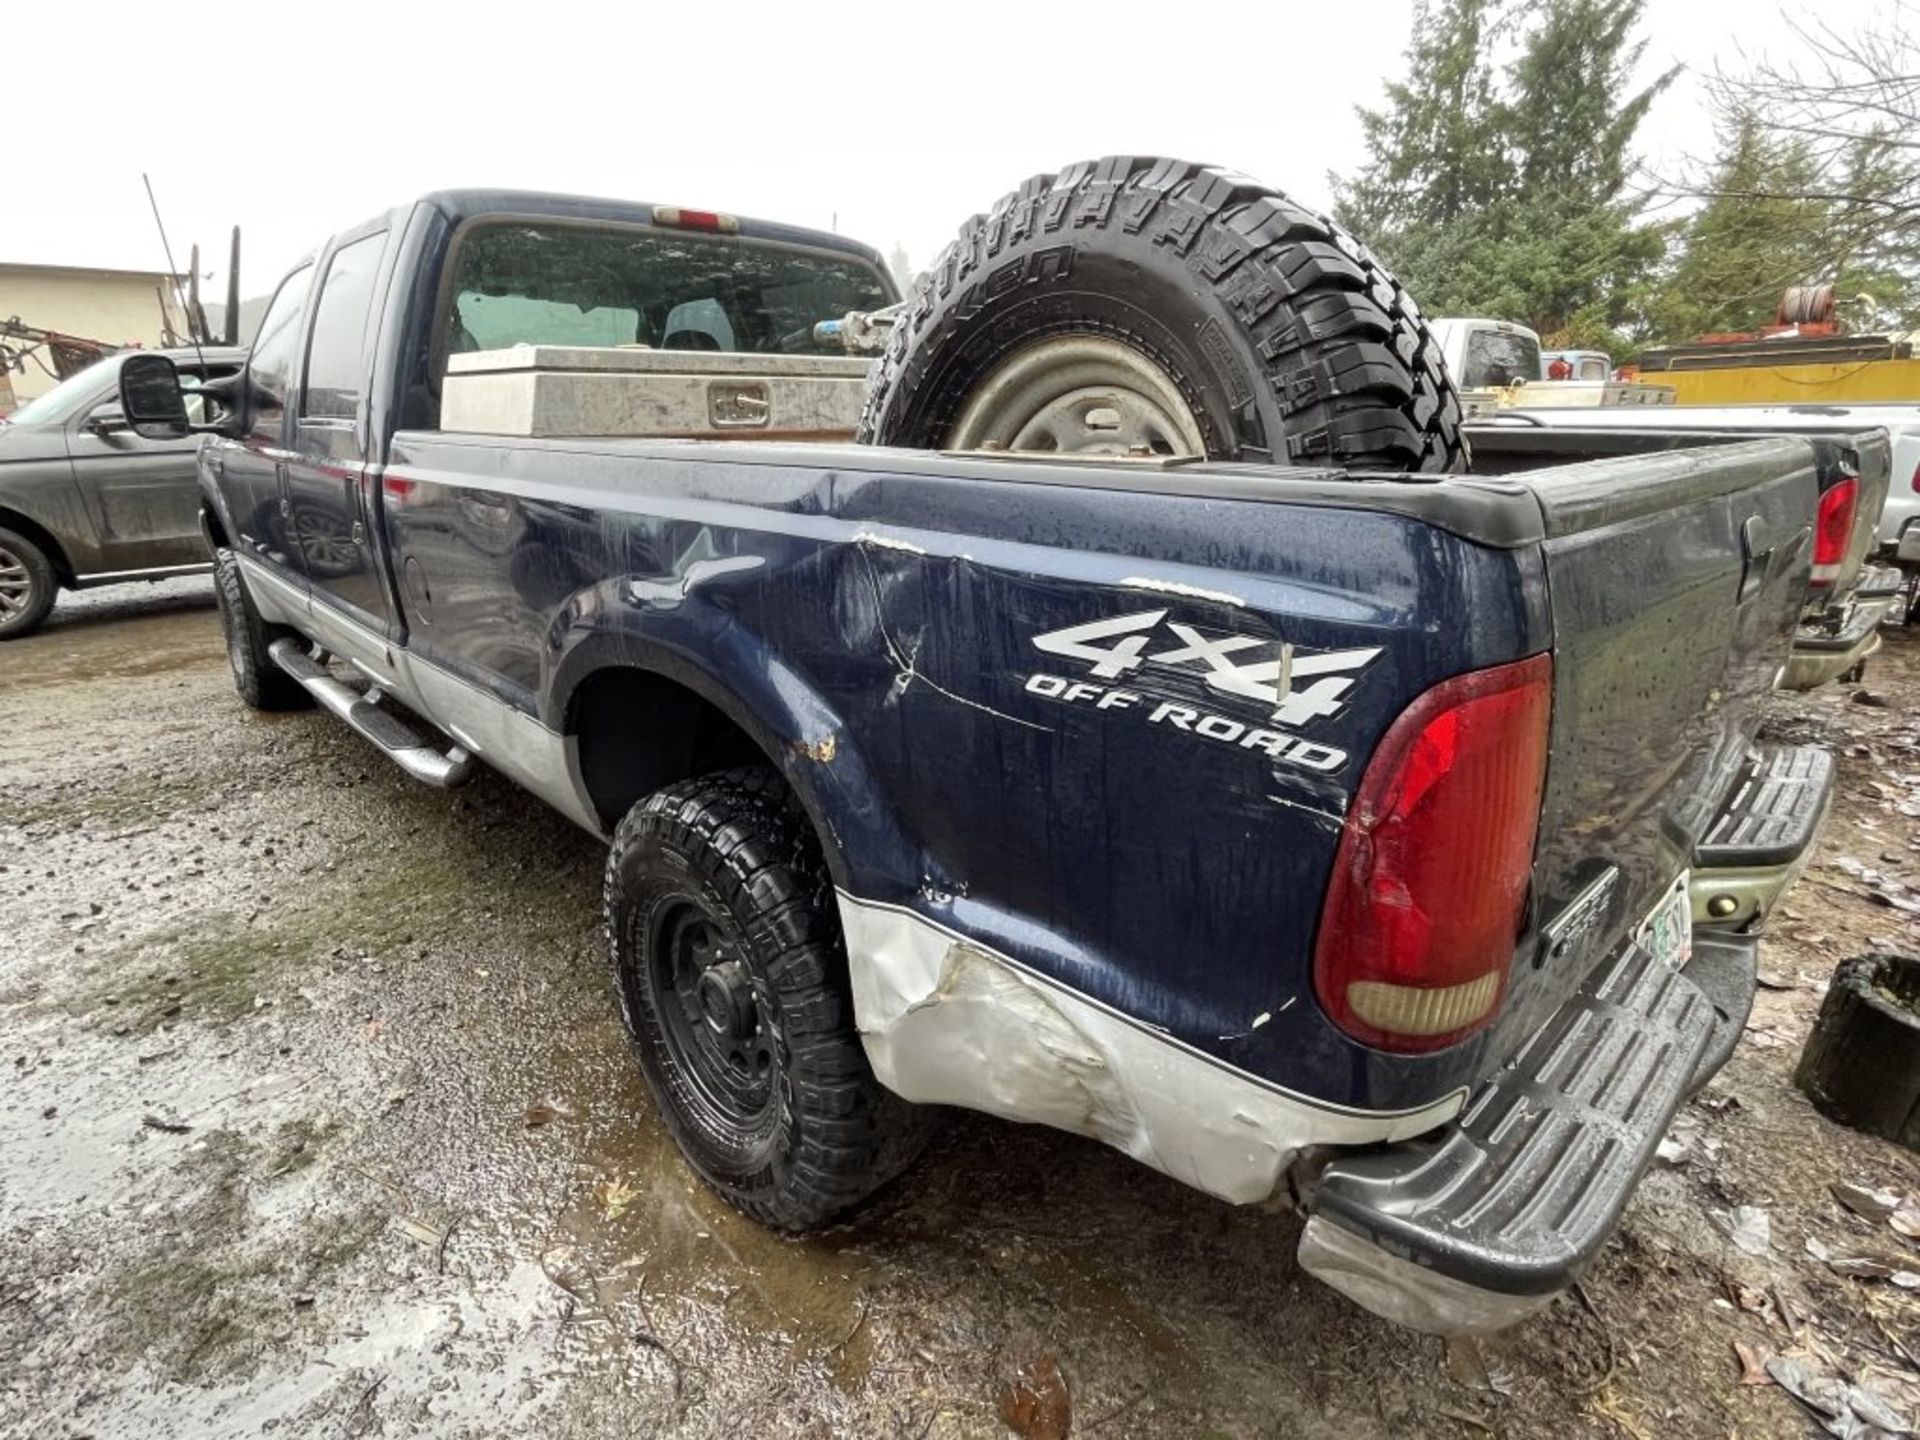 2002 Ford F350 SD 4x4 Crew Cab Pickup - Image 4 of 16